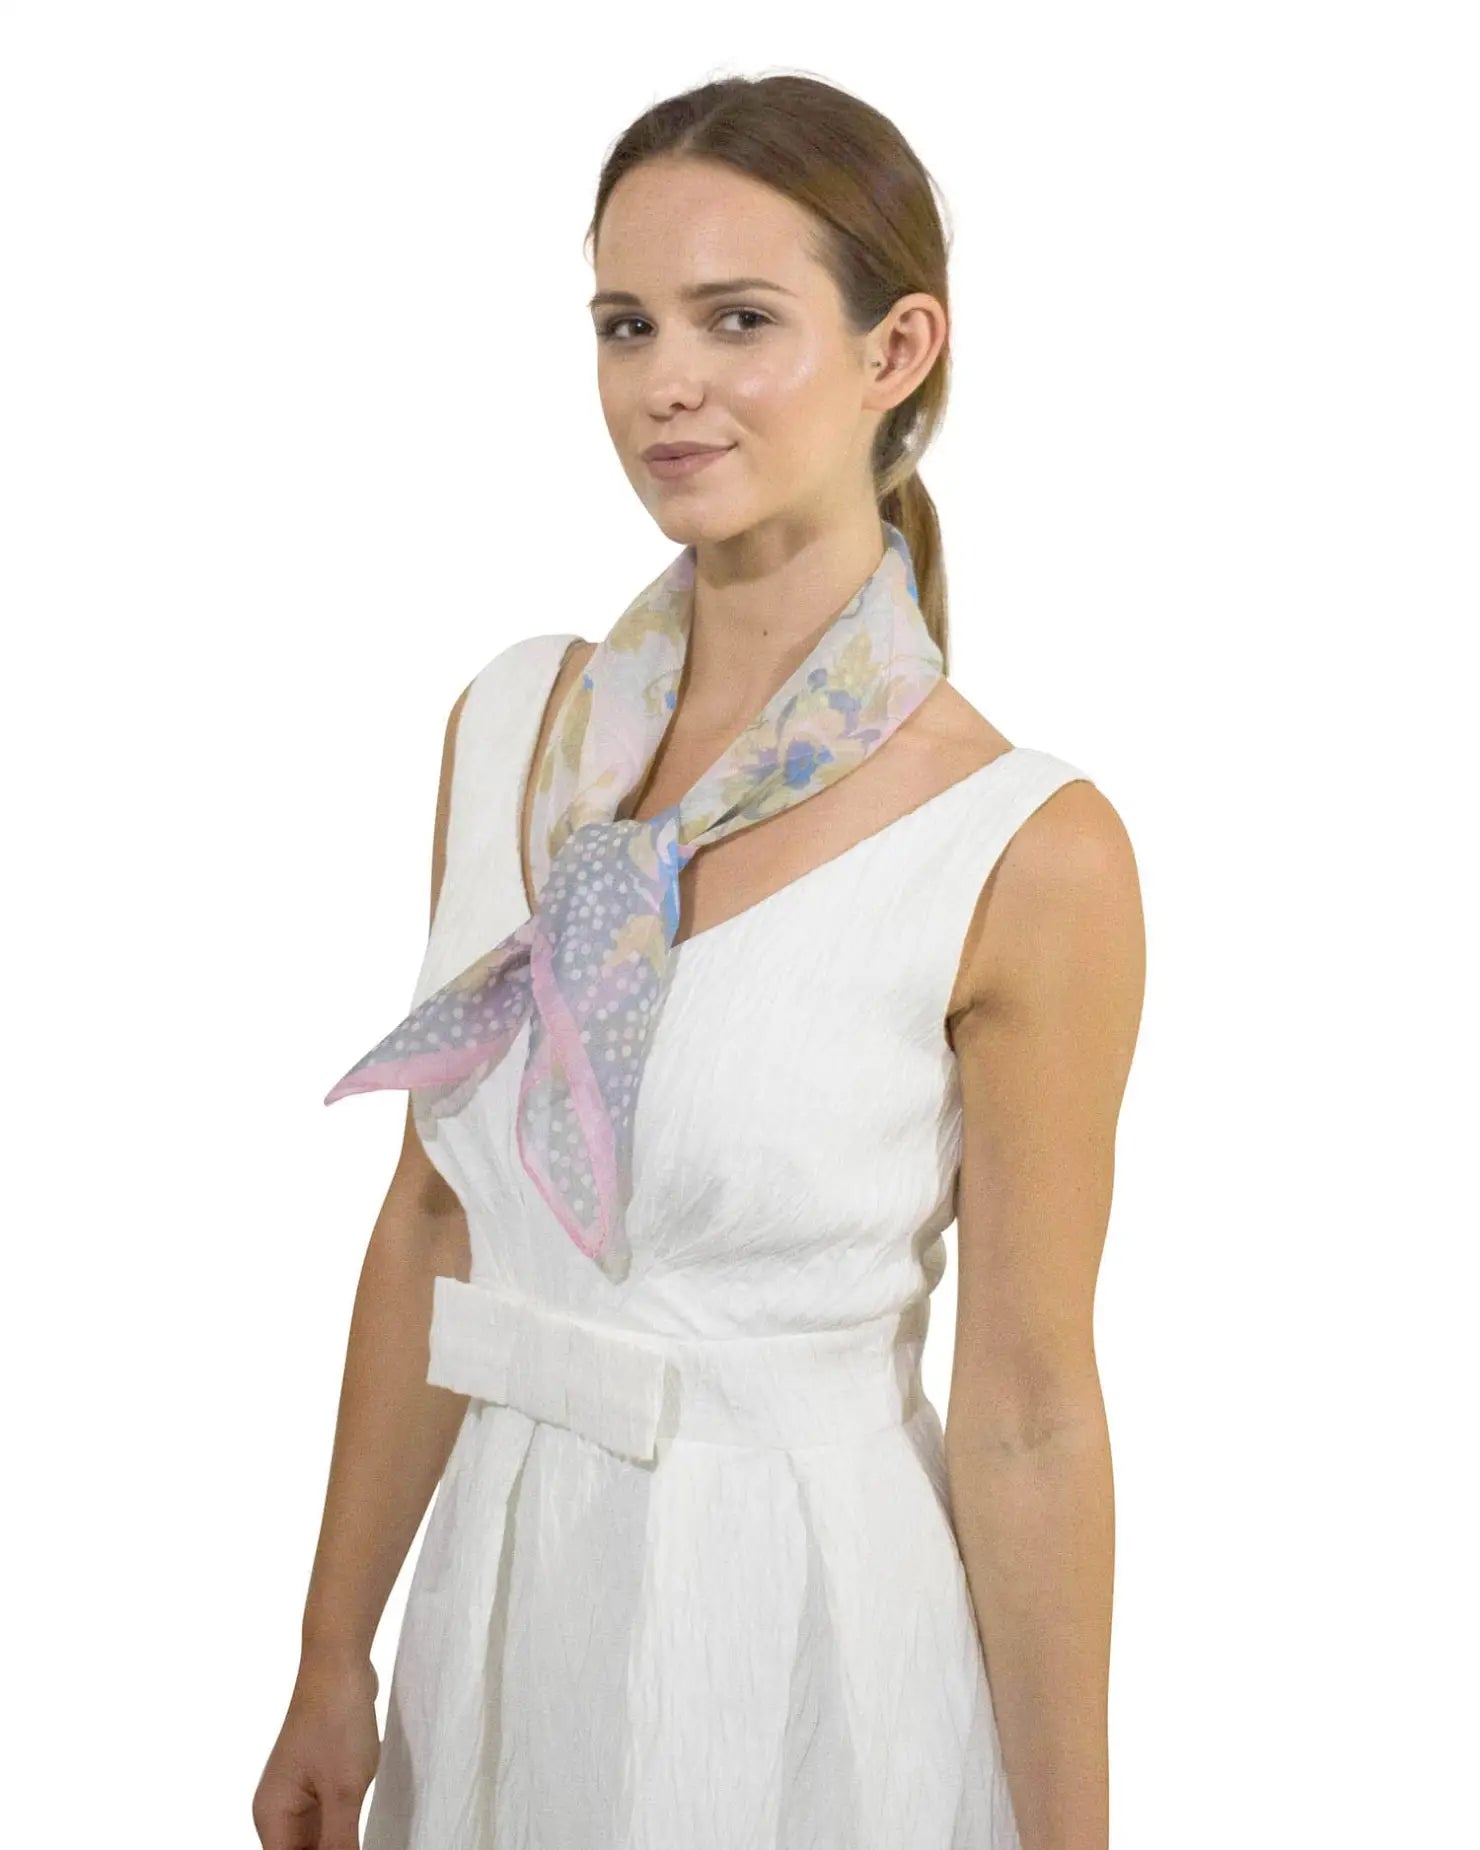 Woman in white dress and pink scarf modeled with Charming Polka Dot & Floral Small Square Scarf.